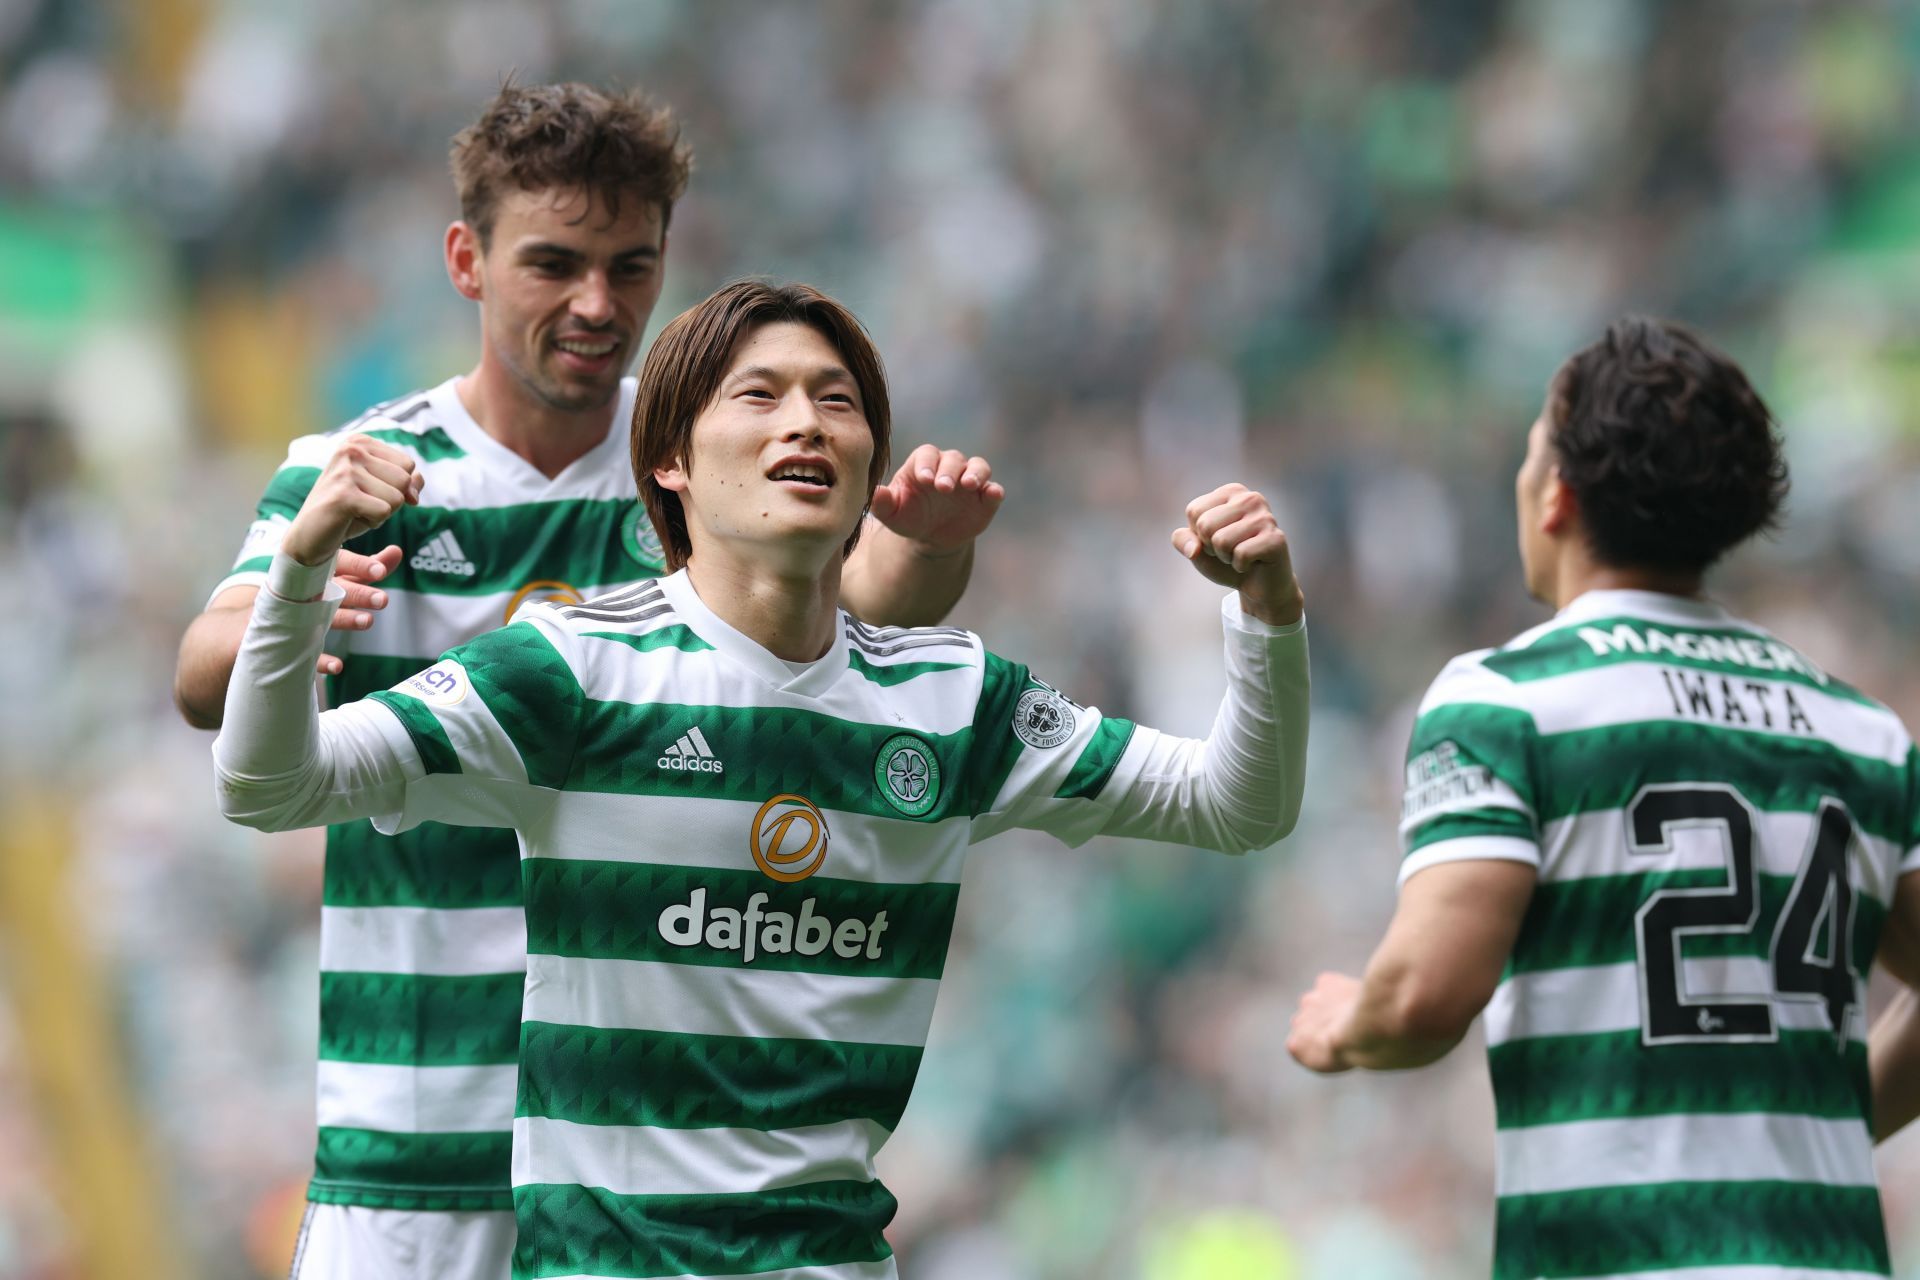 Celtic will face Inverness Caledonian Thistle on Saturday